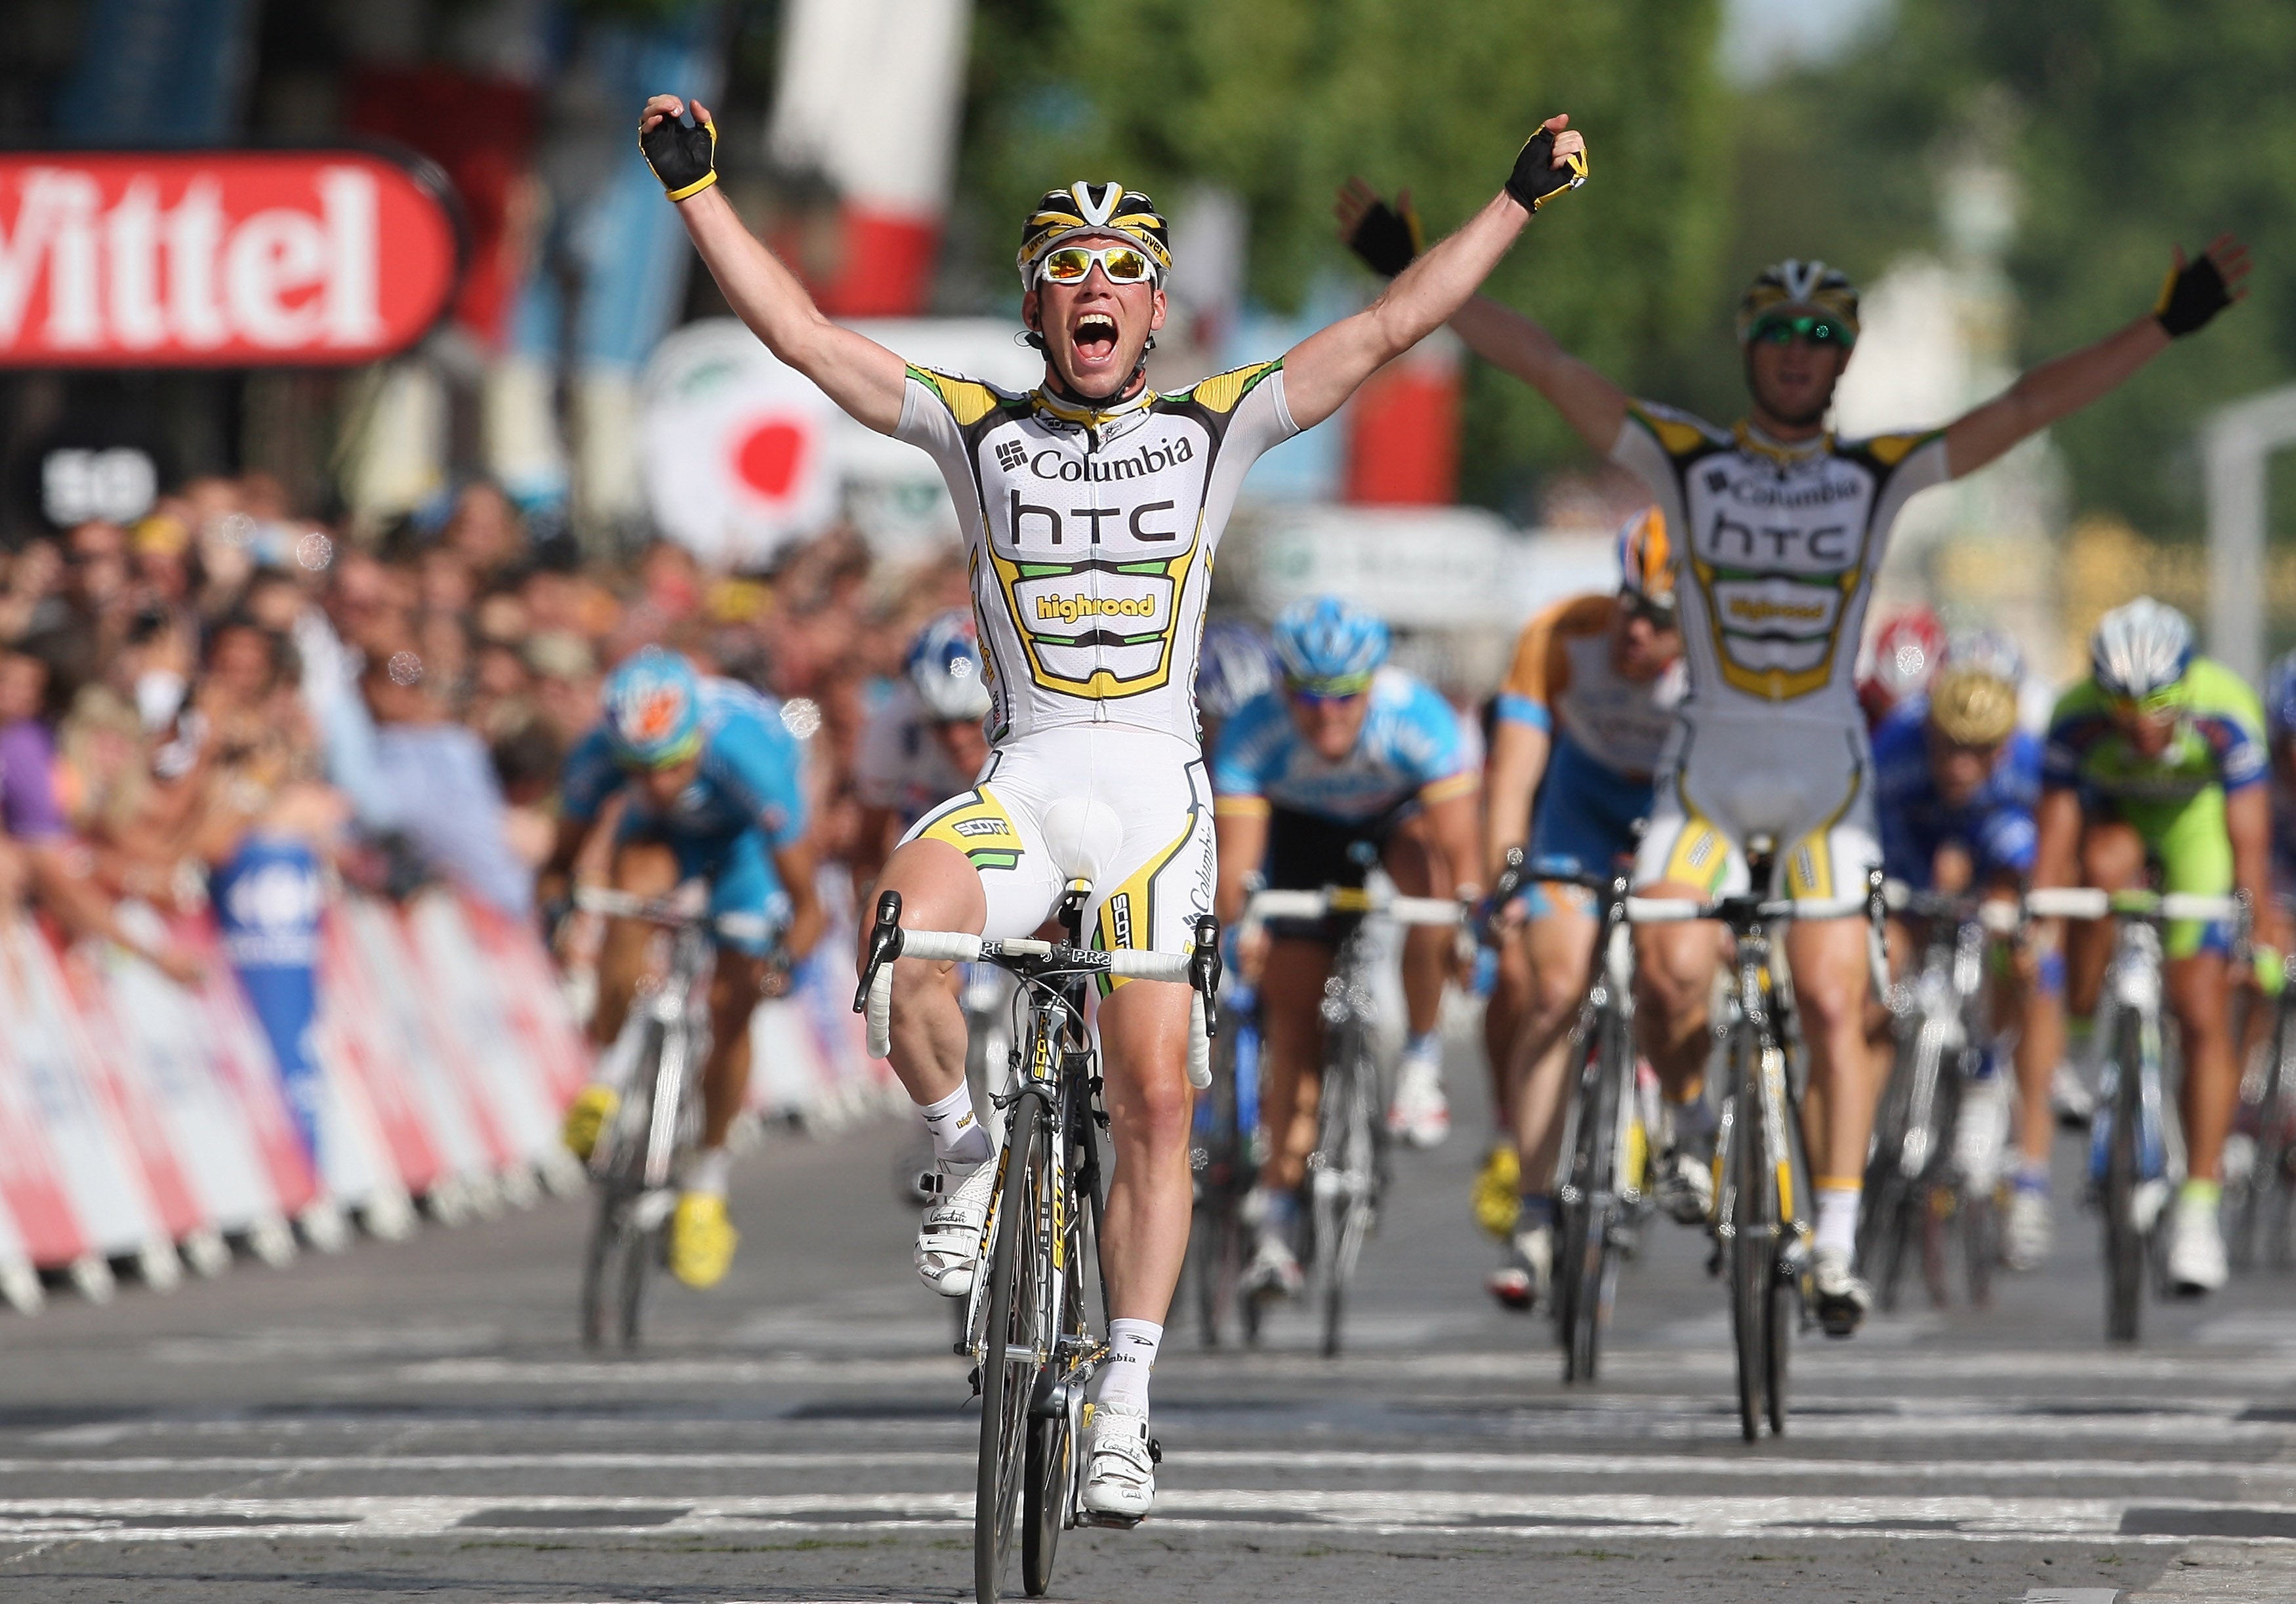 From 2008 to 2011, Cavendish was almost unbeatable in a sprint